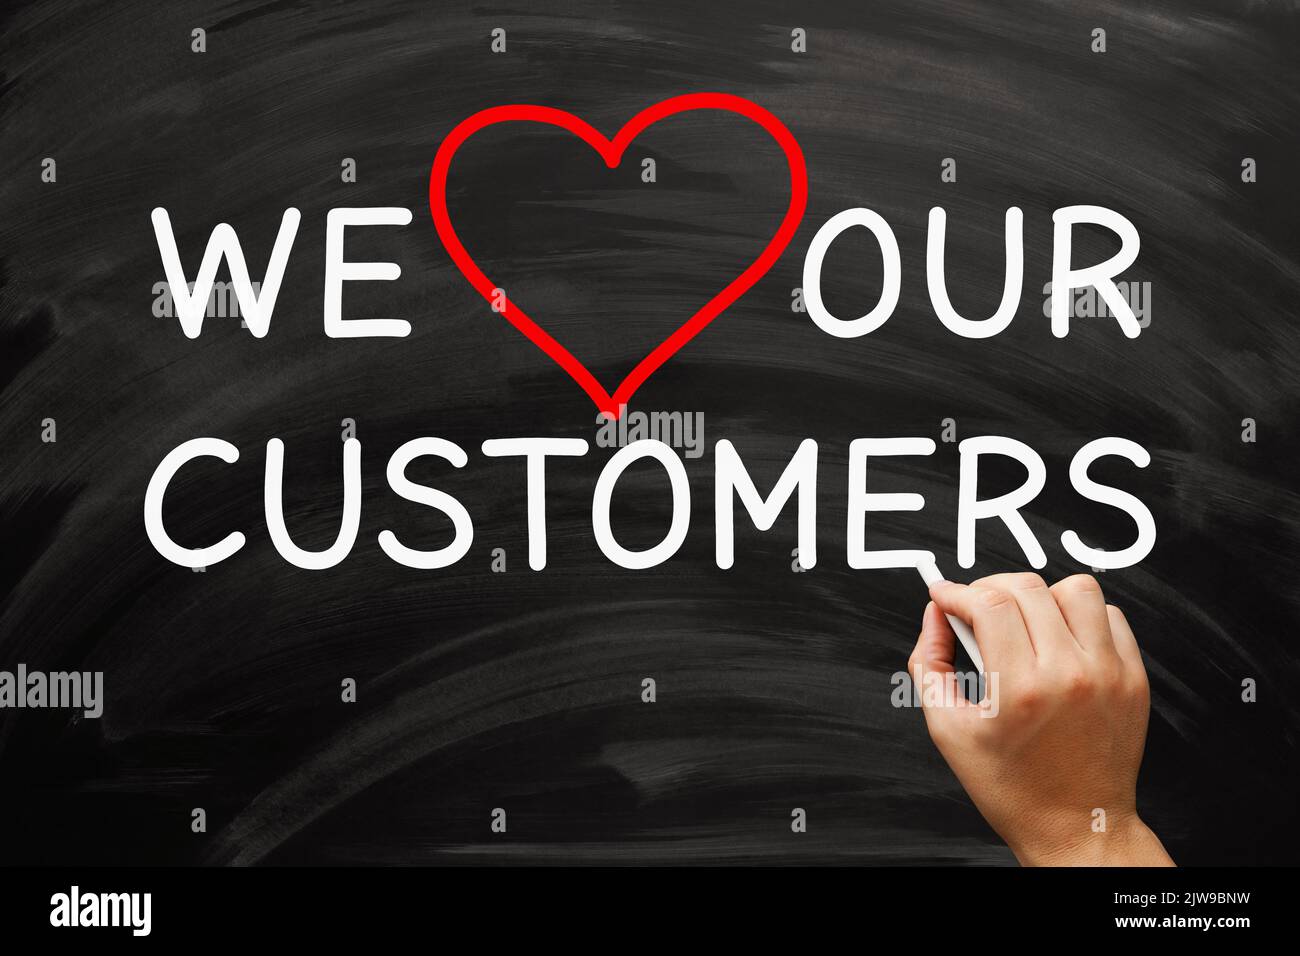 Hand writing We Love Our Customers on blackboard. Customer appreciation and satisfaction concept. Stock Photo